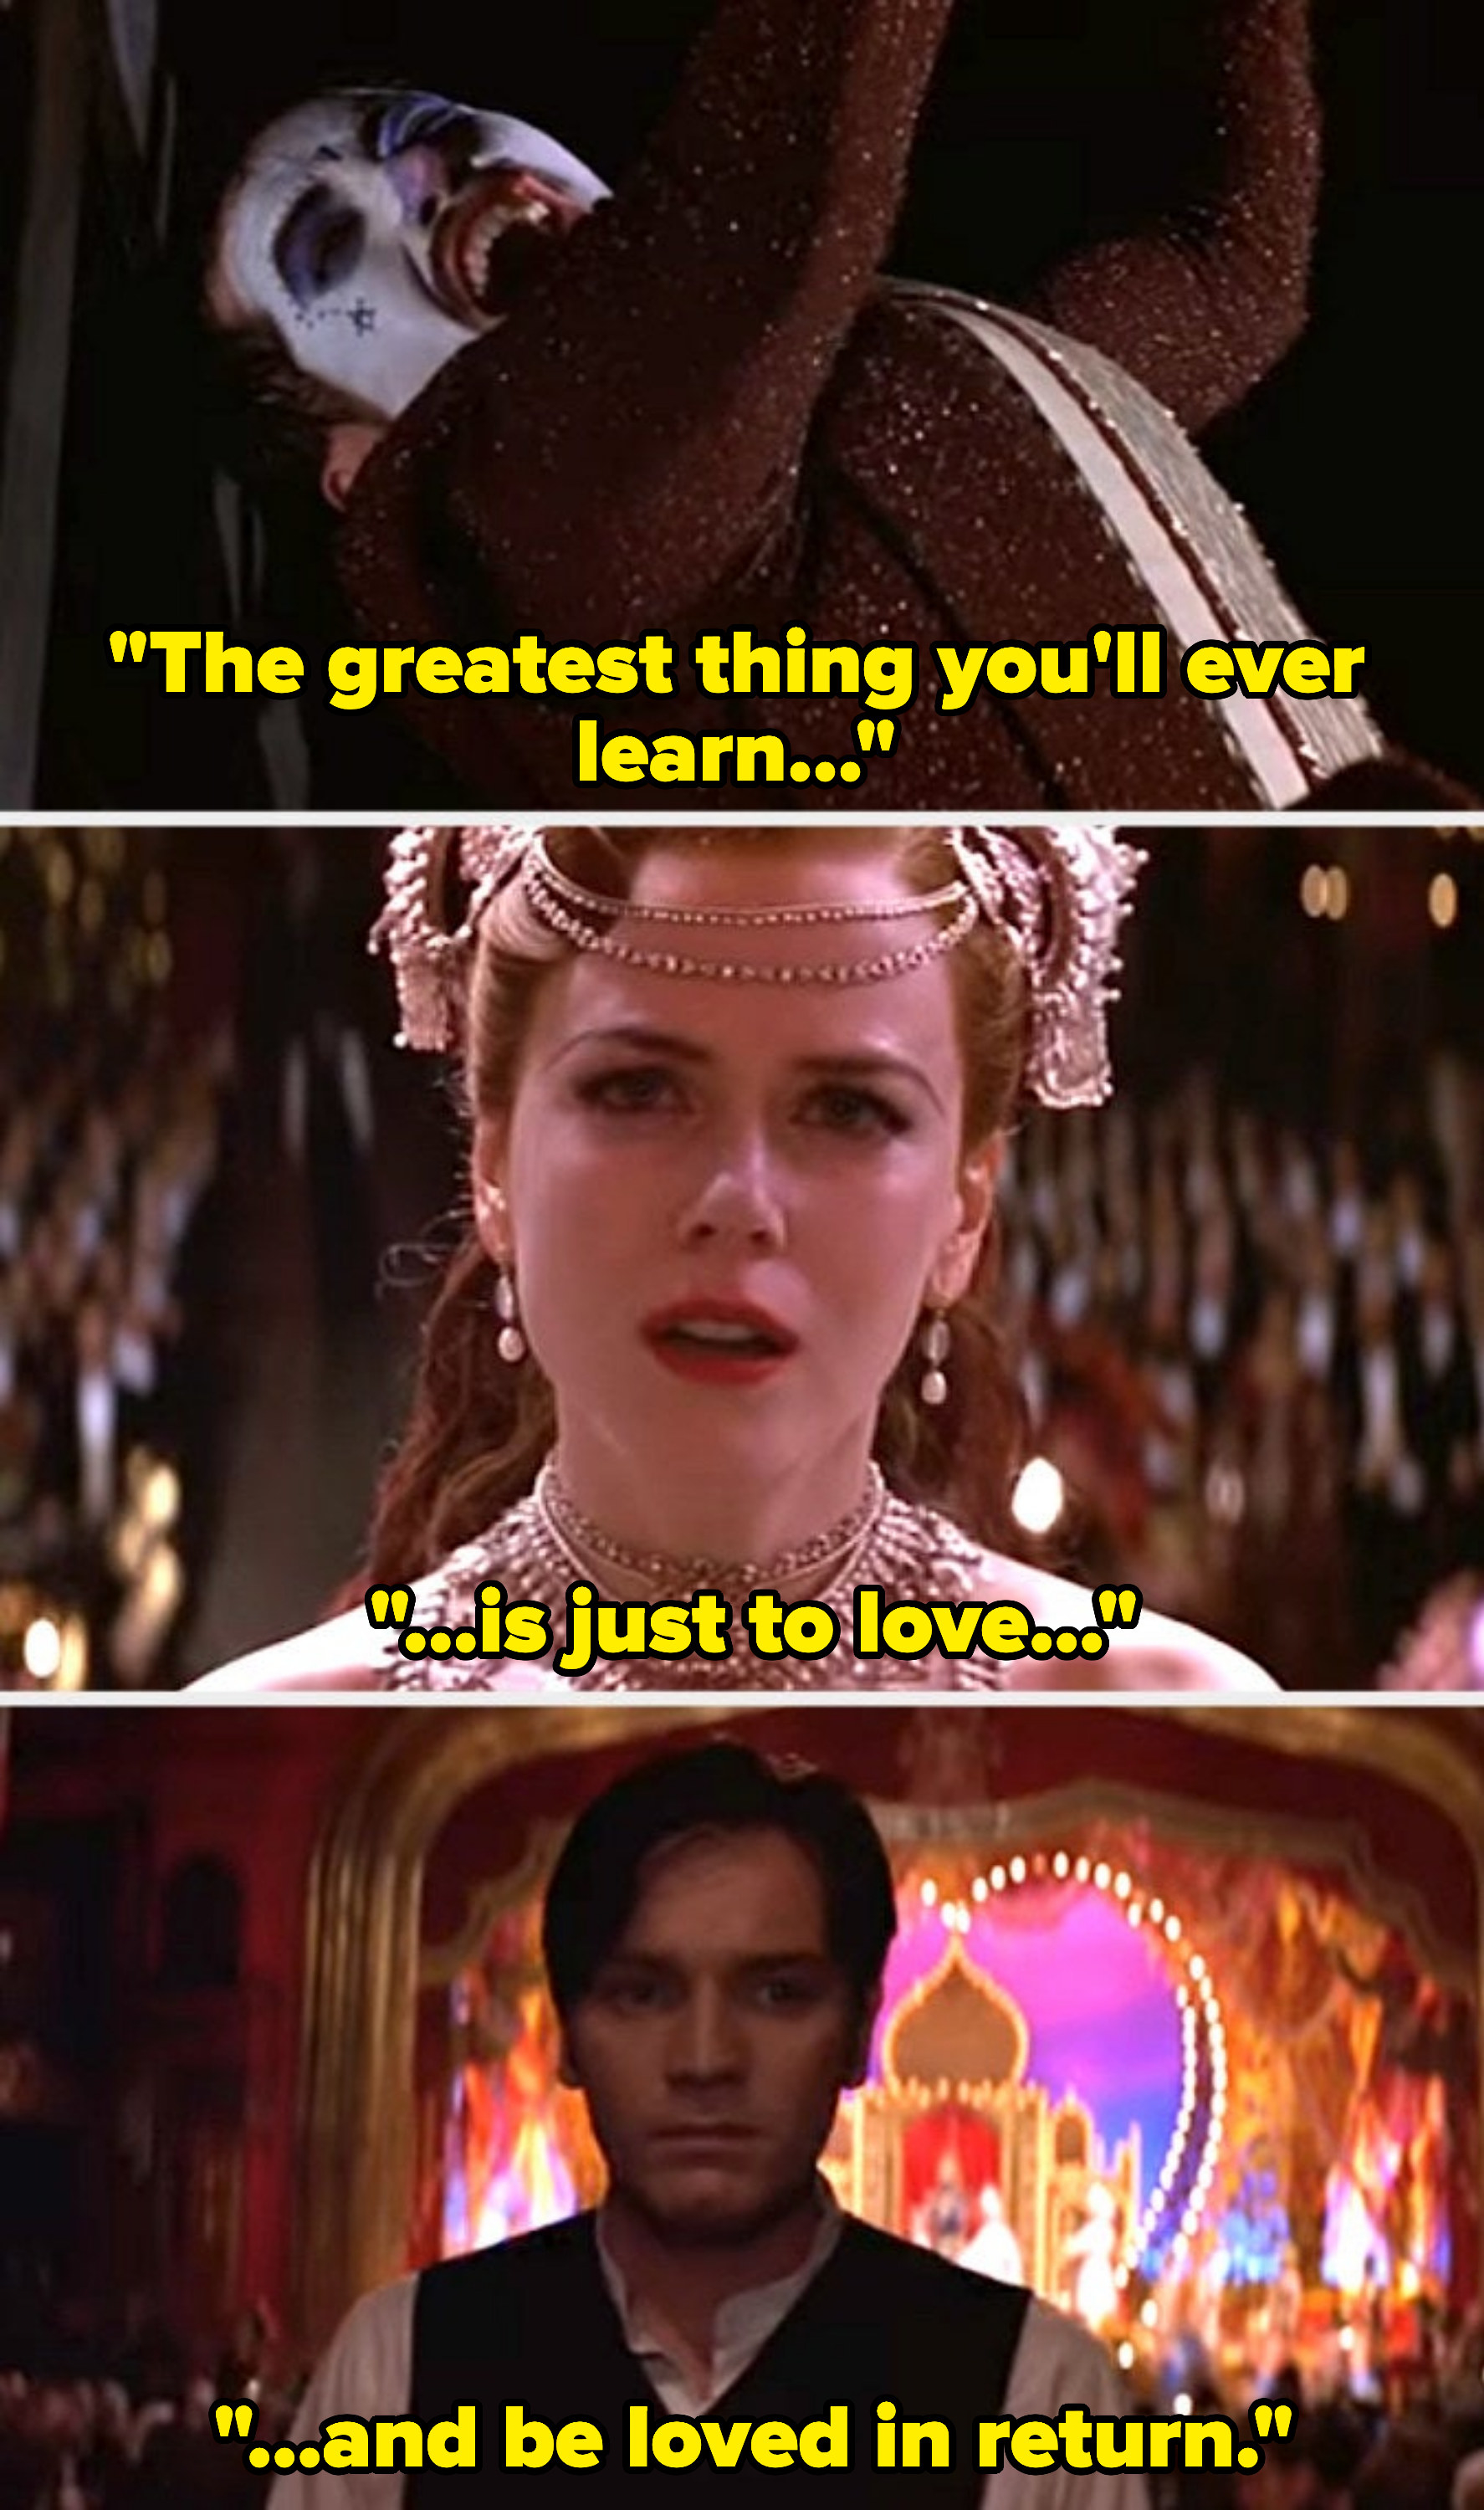 Screenshots from &quot;Moulin Rouge!&quot;